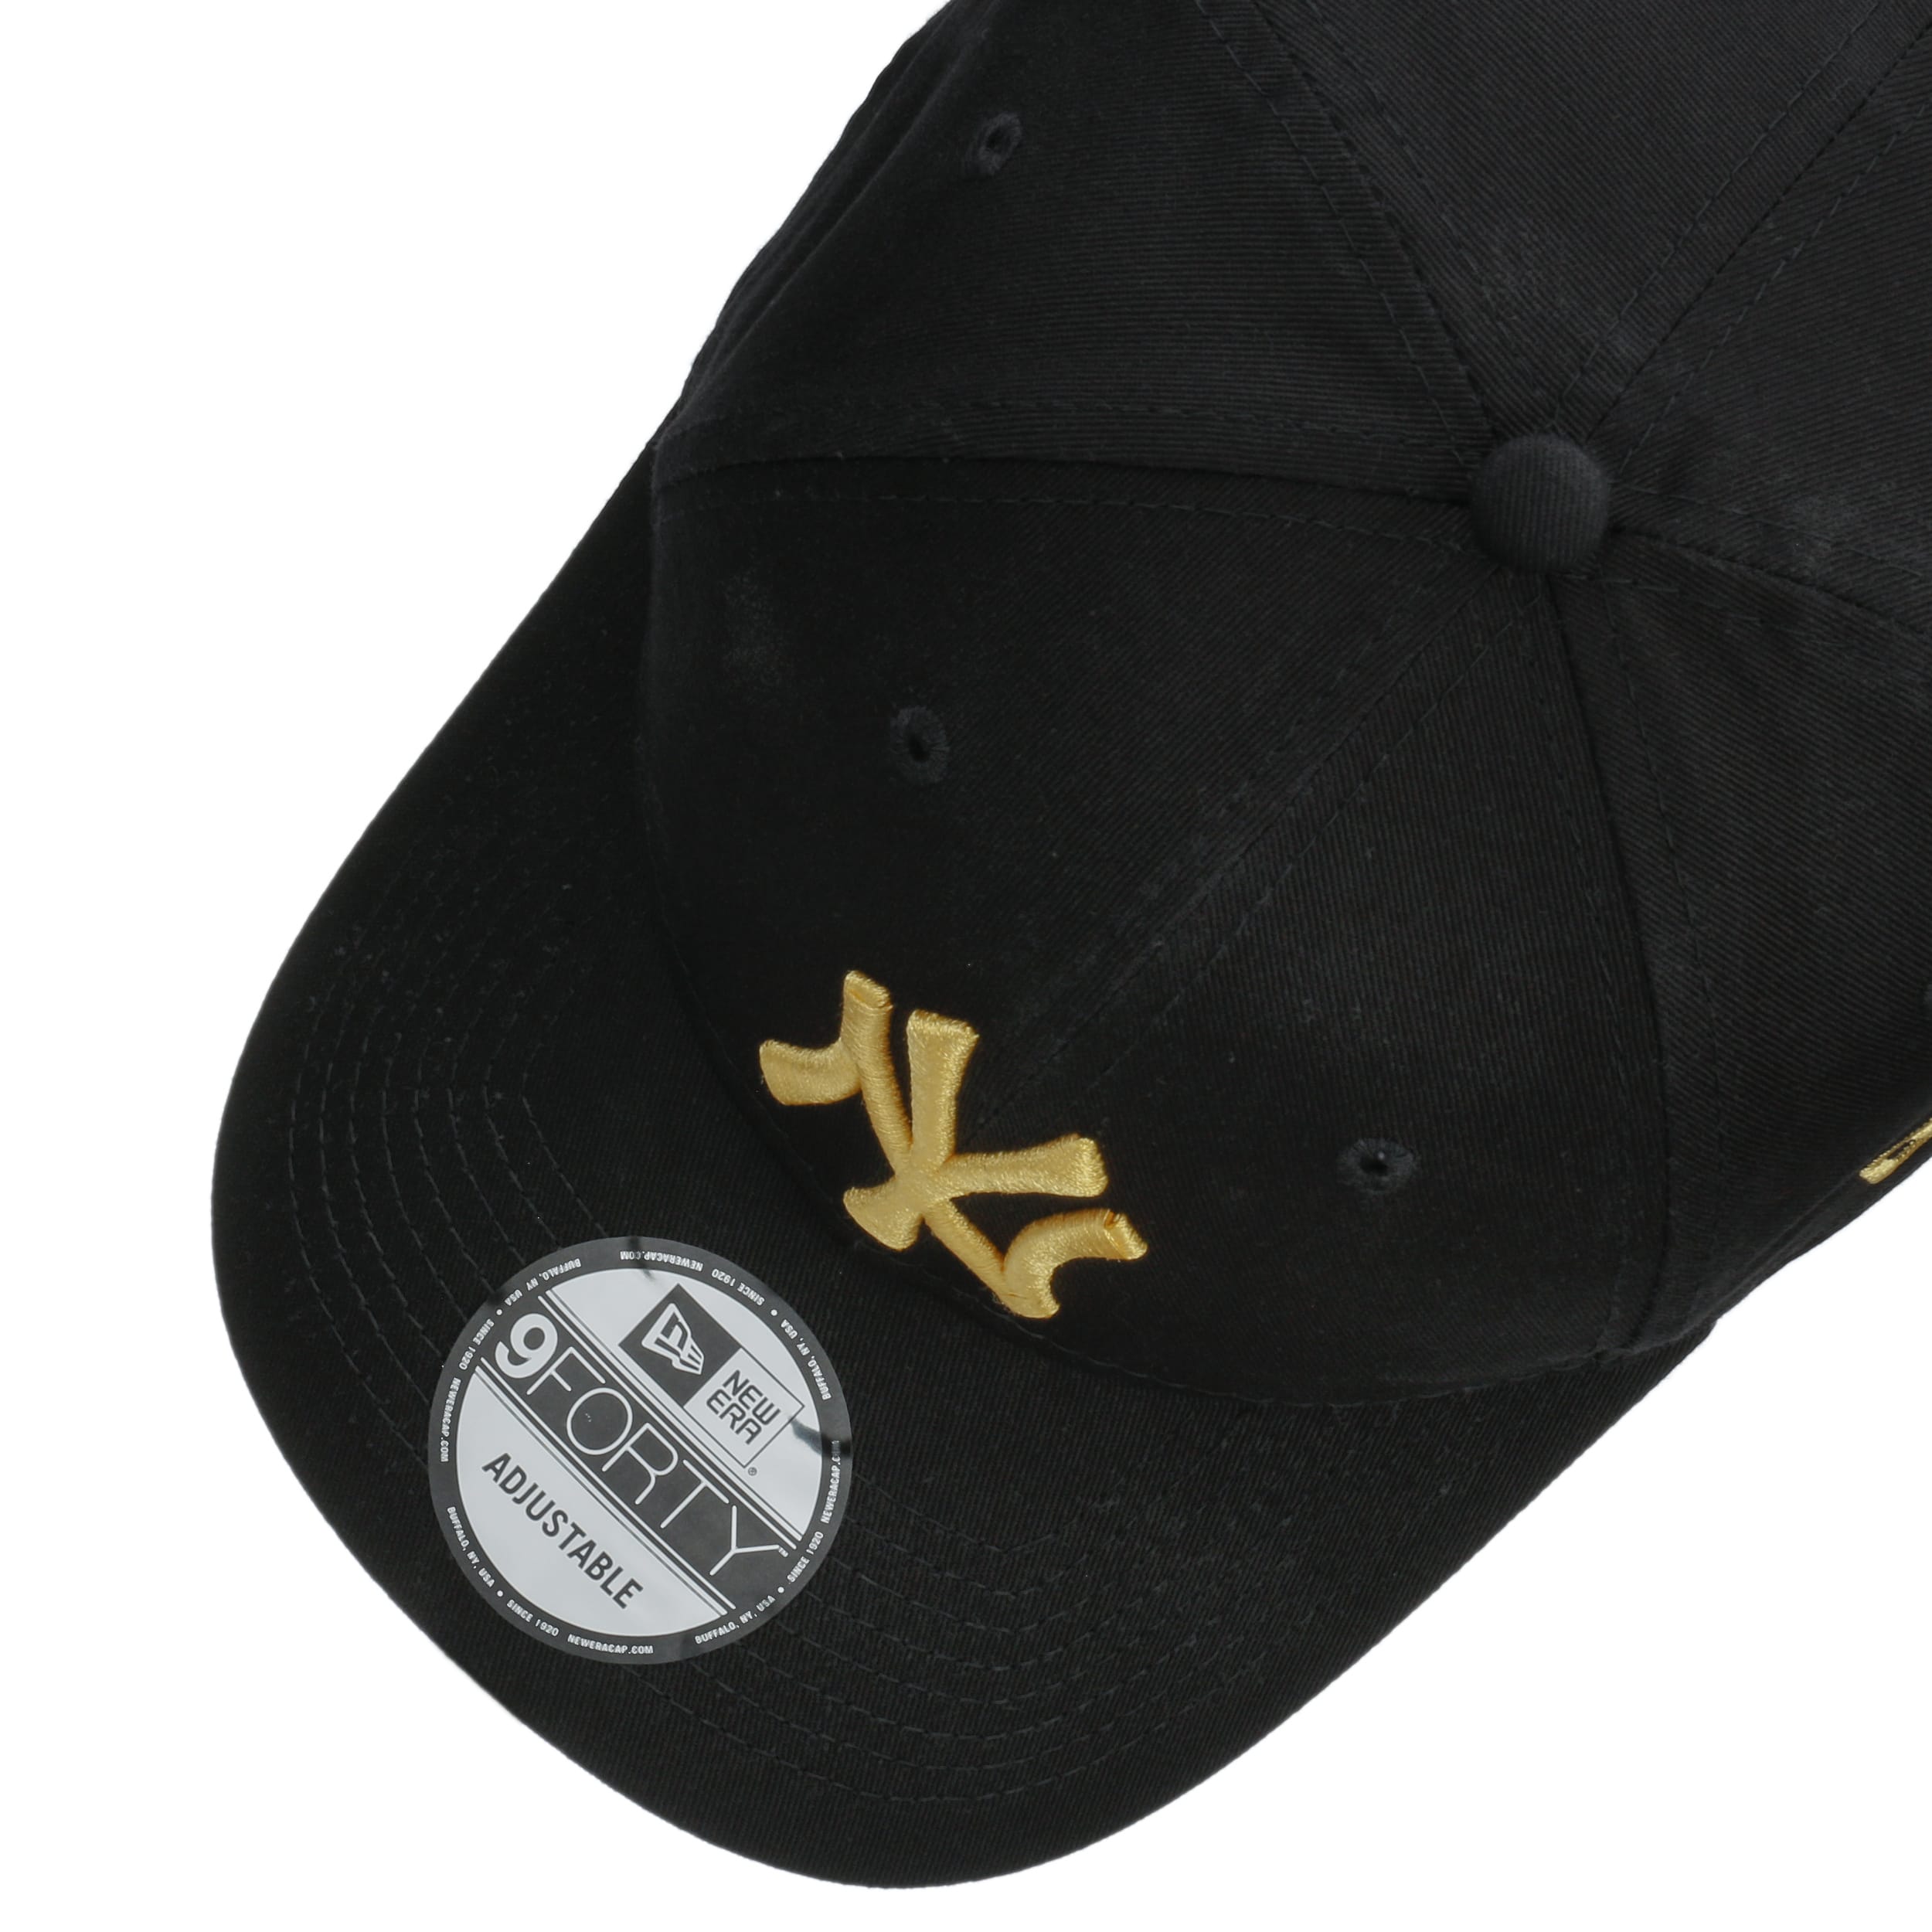 25,95 - by € 9Forty New MLB Twotone Cap Yankees Era